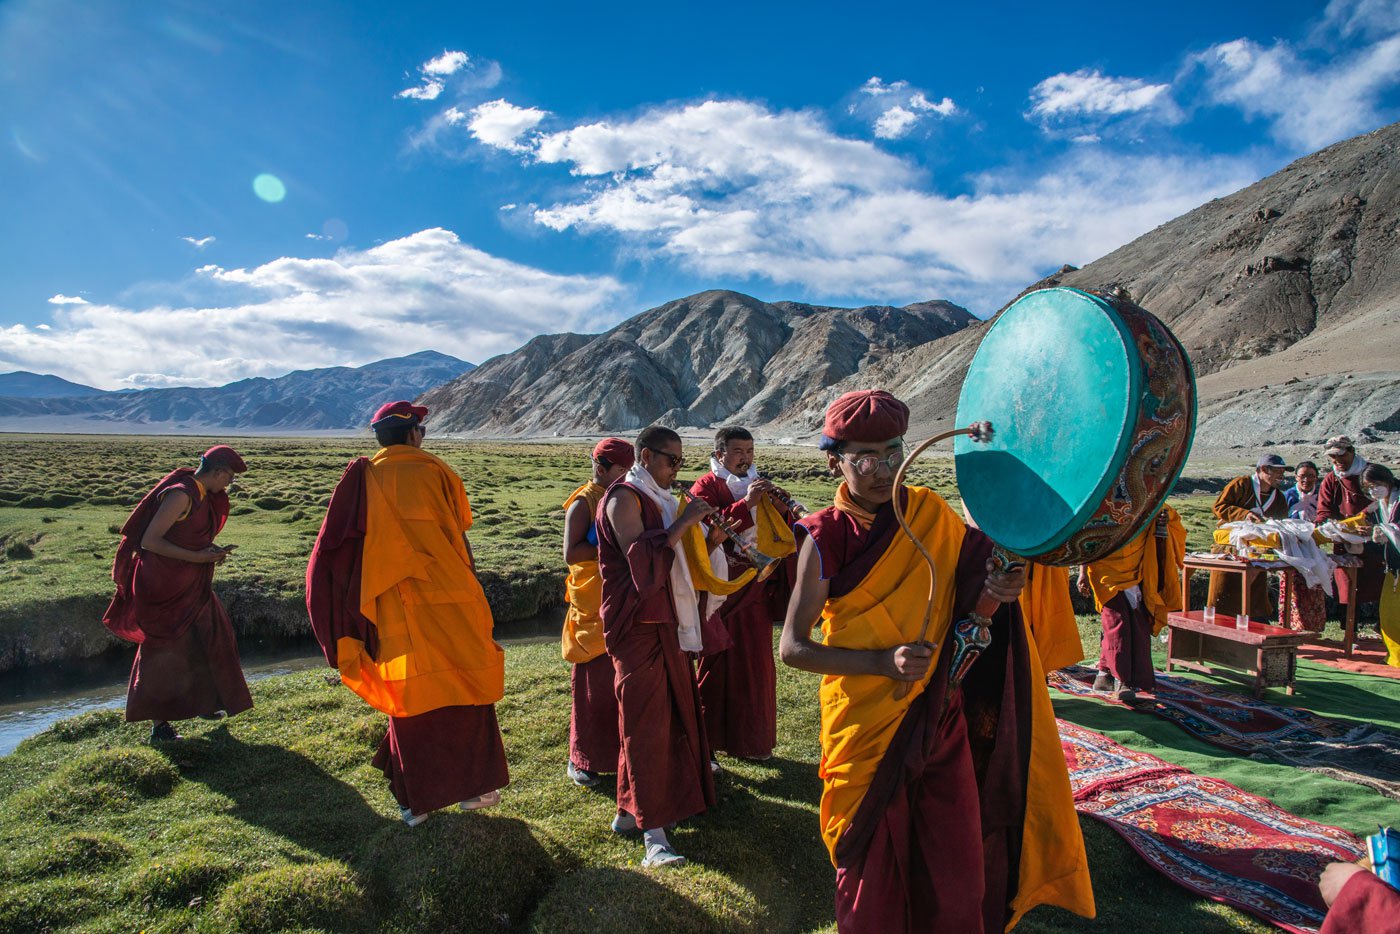 After circling every village on their route, the convoy finally stops at a beautiful grassland near Naga. The residents of this village are of Tibetan origin. With the beating of drums, the lamas declare the journey over